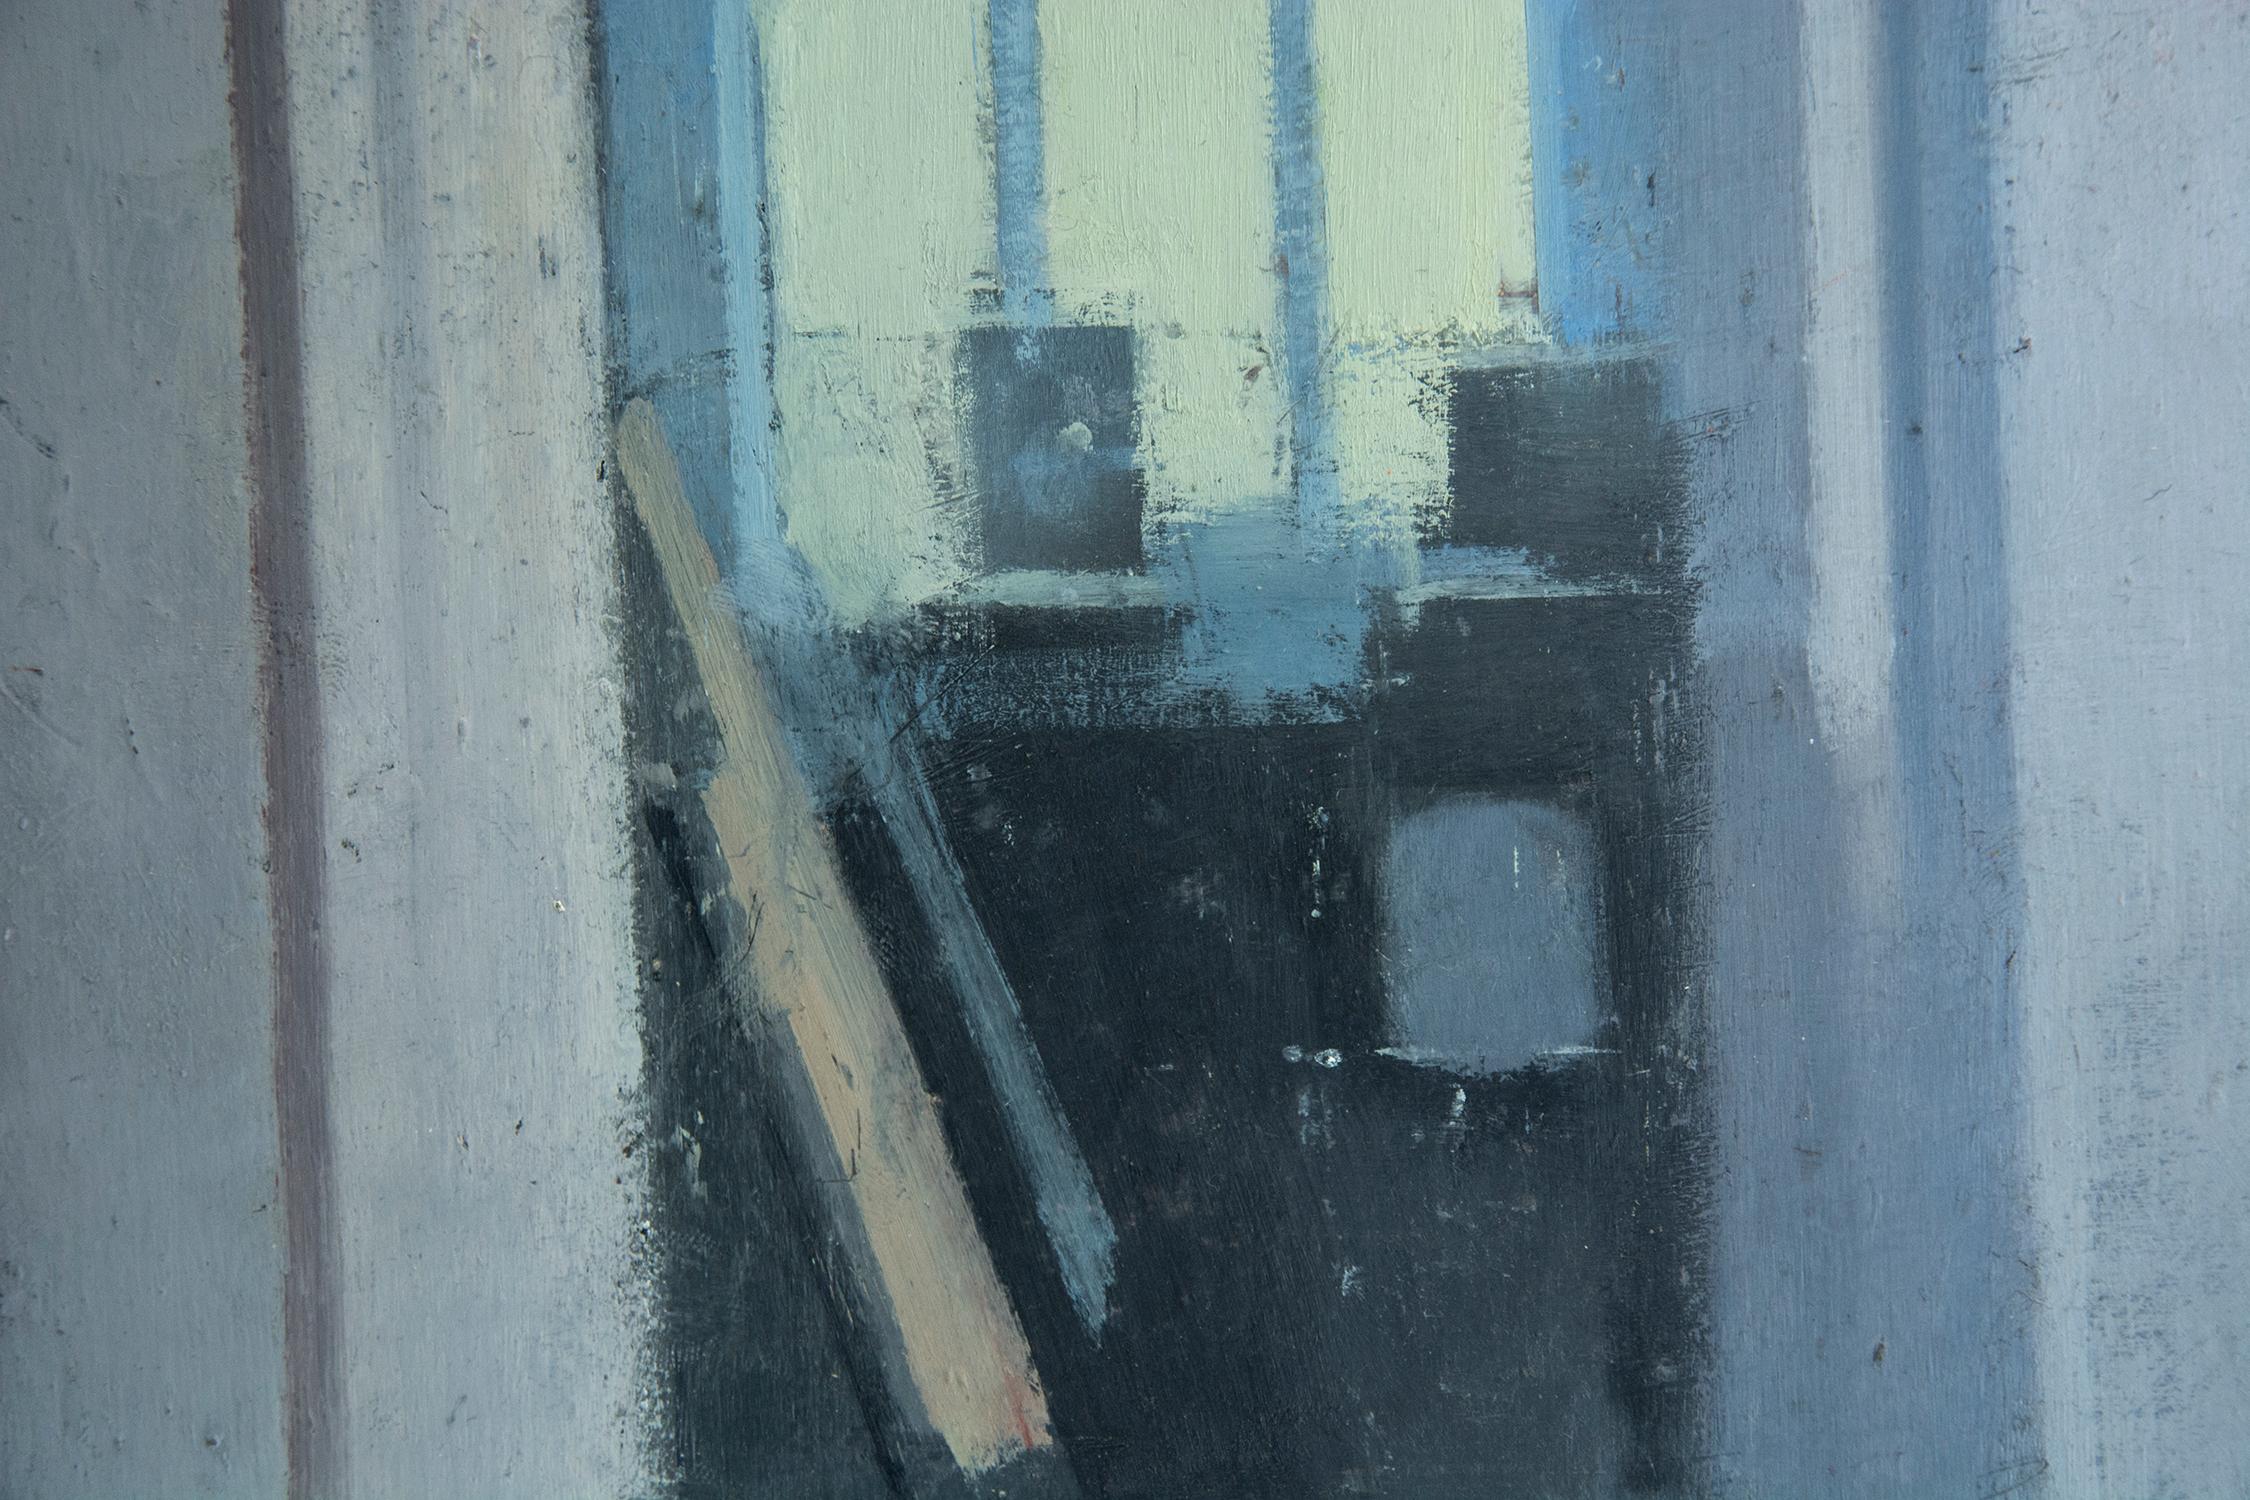 Studio - small, cool colors, intimate, interior, abstraction, oil on panel - Painting by Daniel Hughes